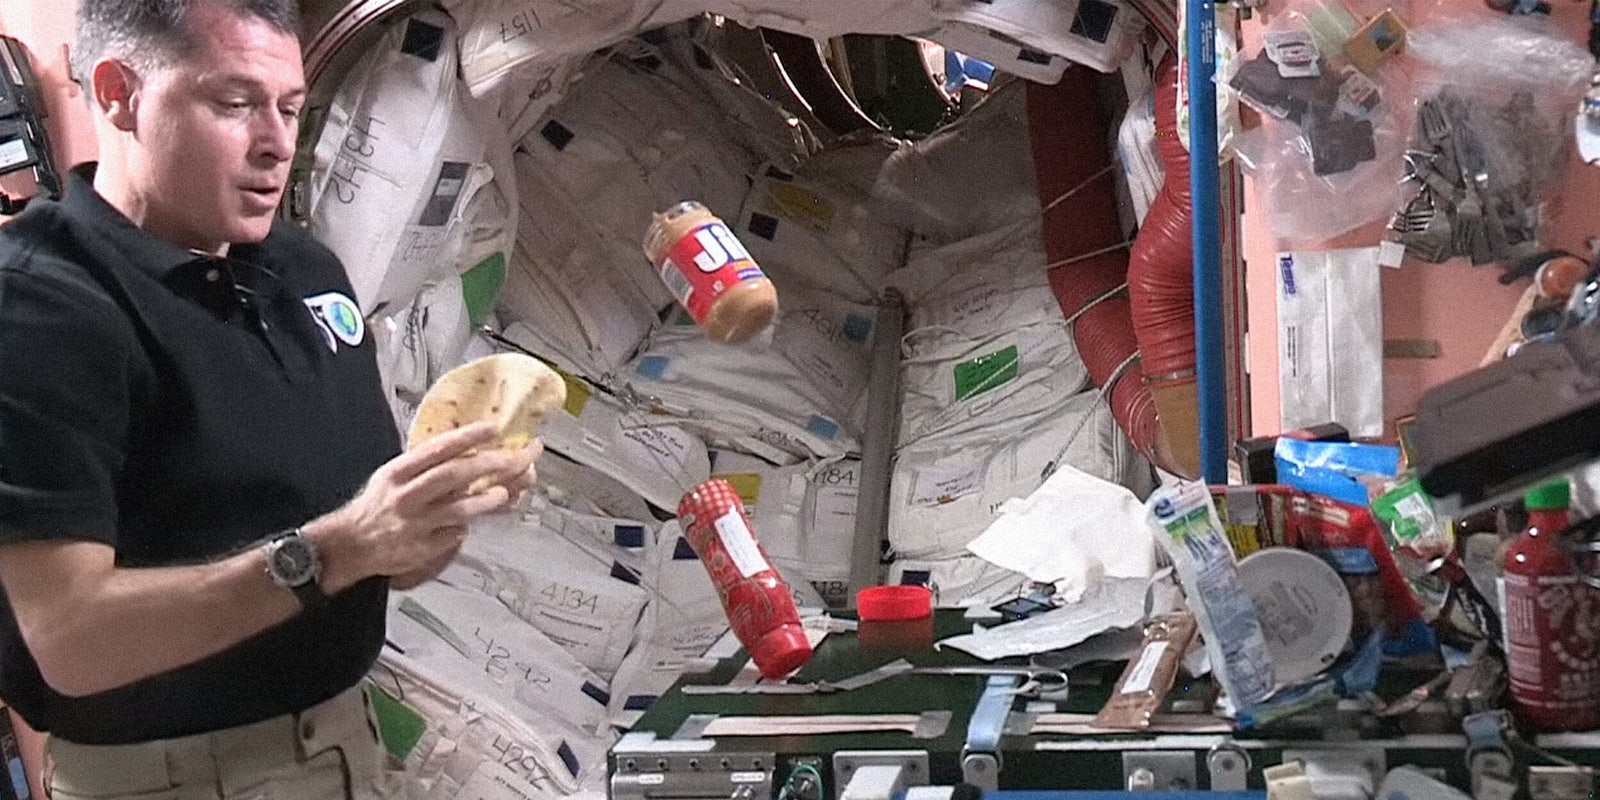 Astronaut making peanut butter and jelly sandwich in space